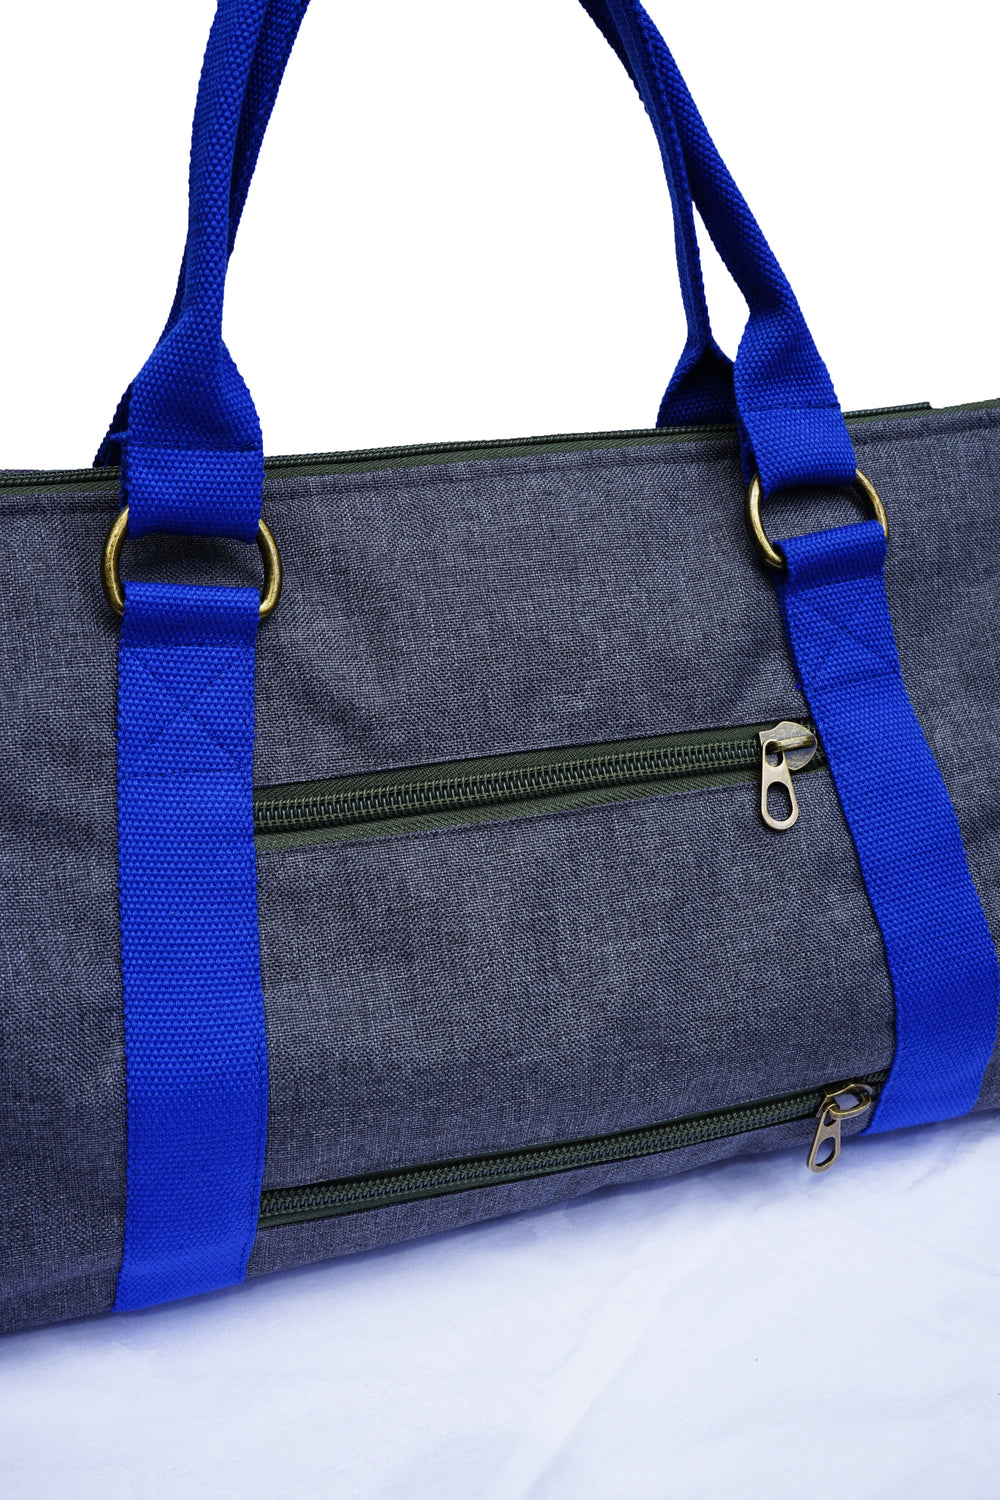 Overnight Duffle Bag</br>Chambray Canvas</br><small><i>(Charcoal/ Ultra Marine)</i></small> - Meridian Lee